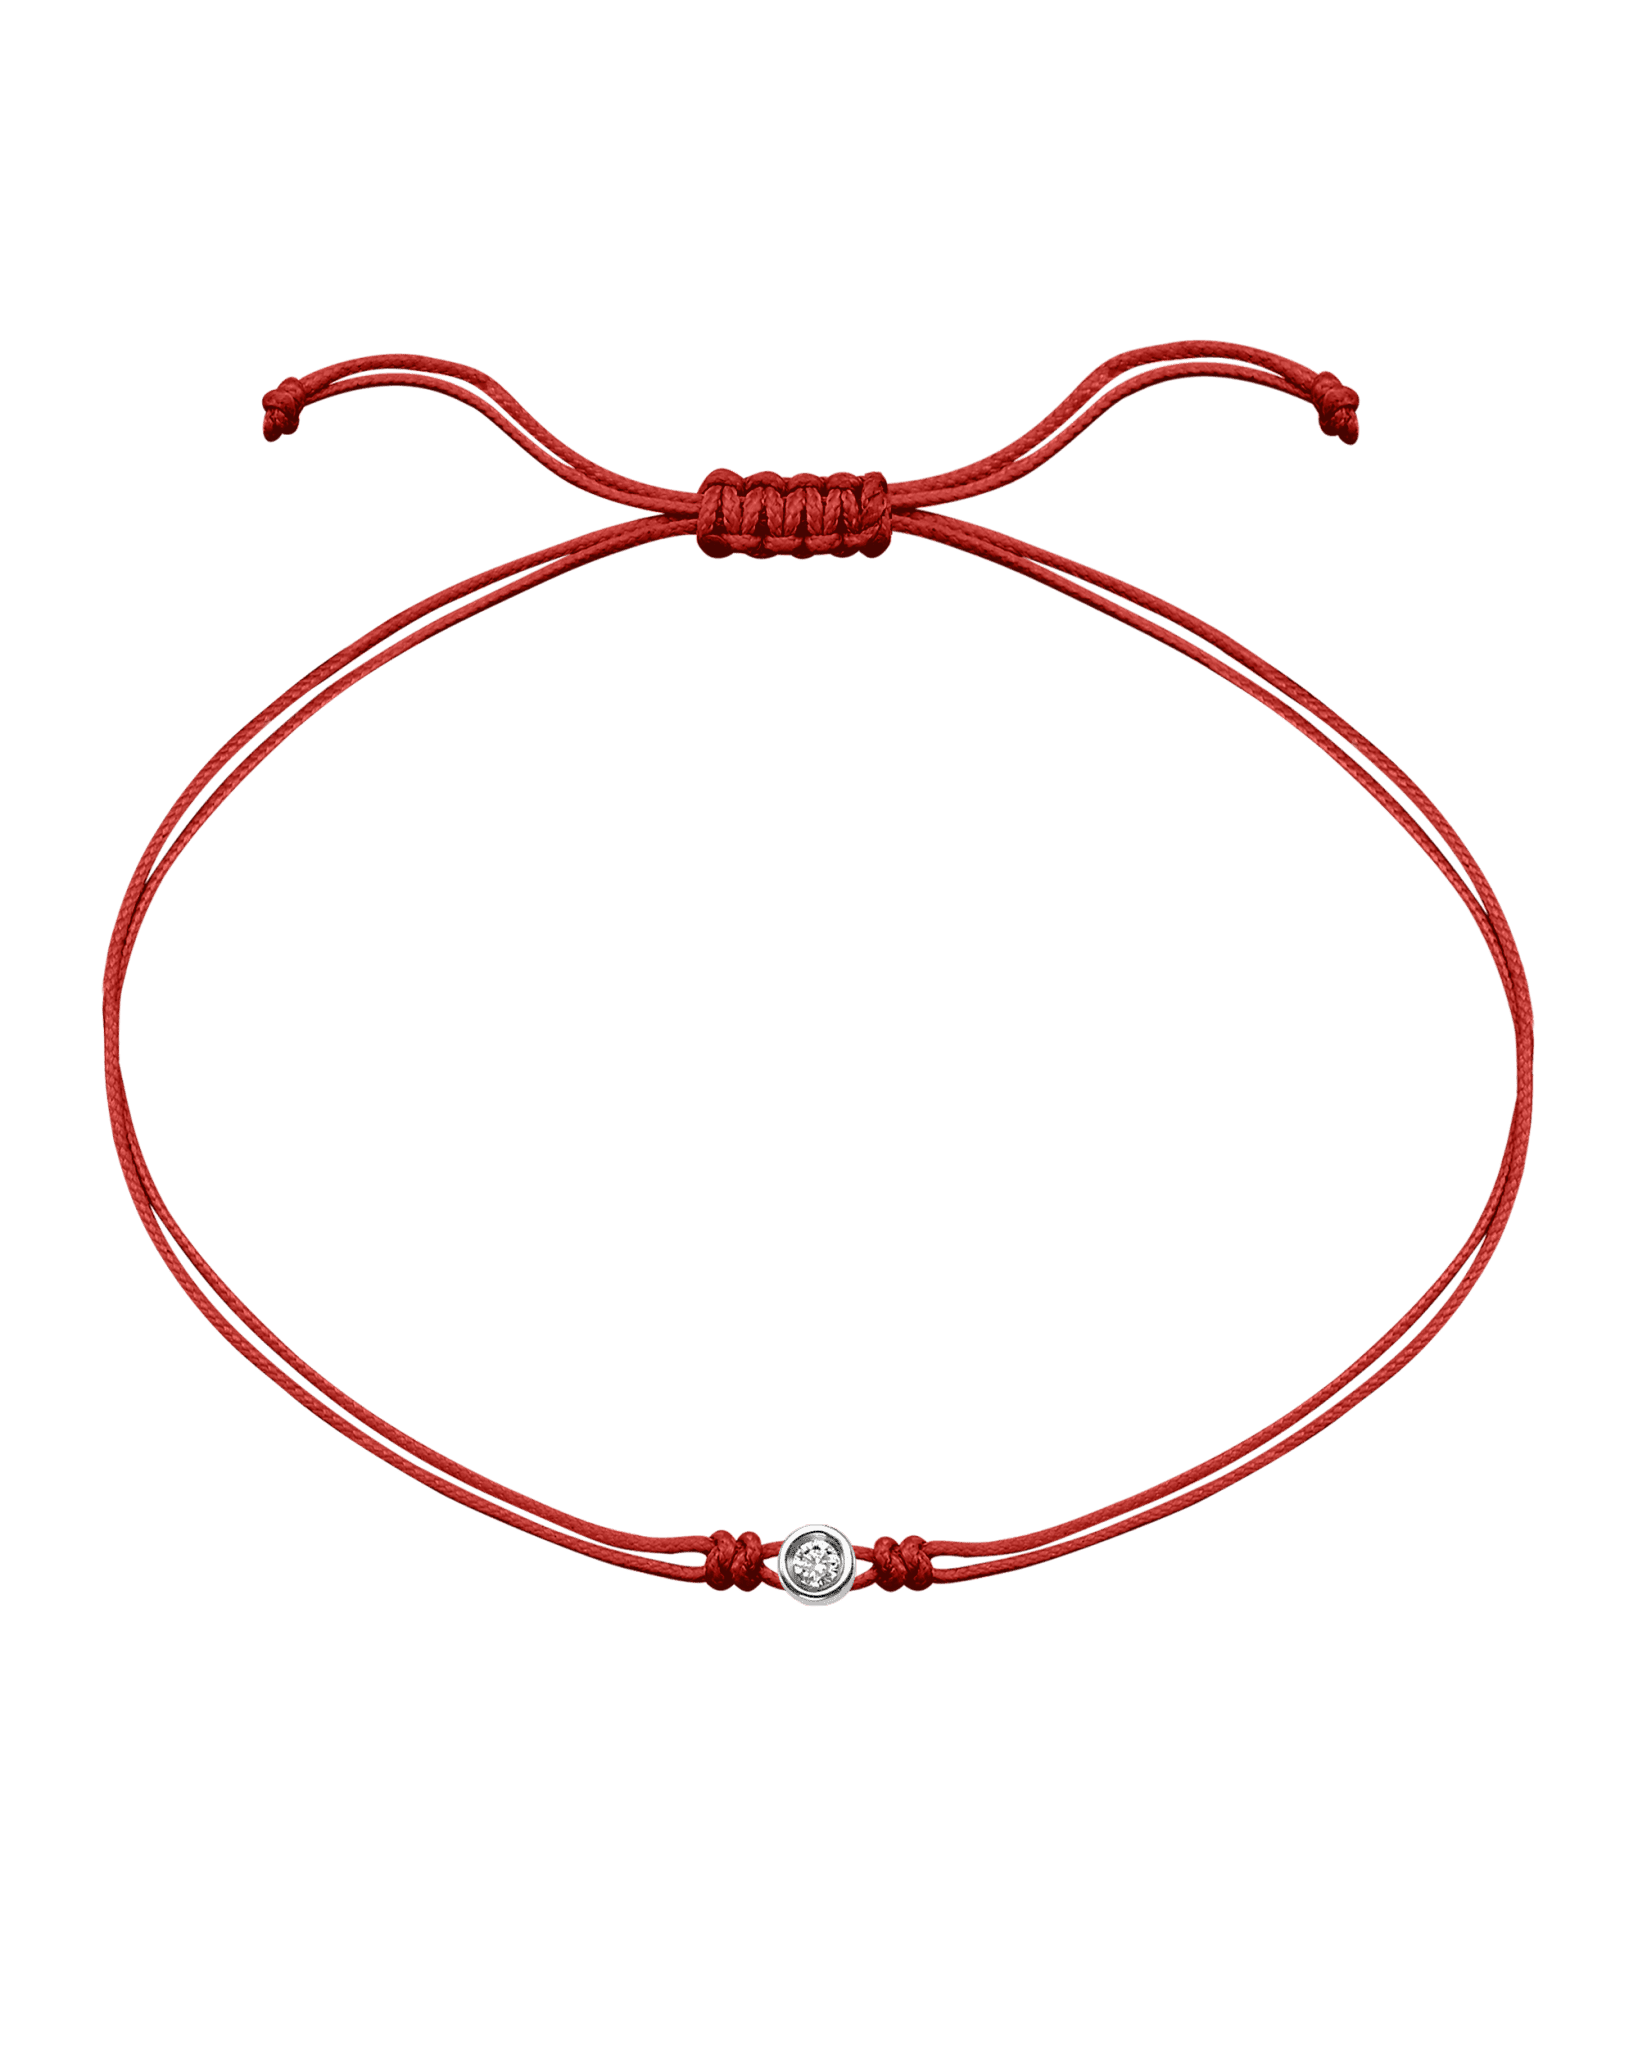 Le String of Love - Or Blanc 14 carats Bracelets magal-dev Rouge Small: 0.03 carats 